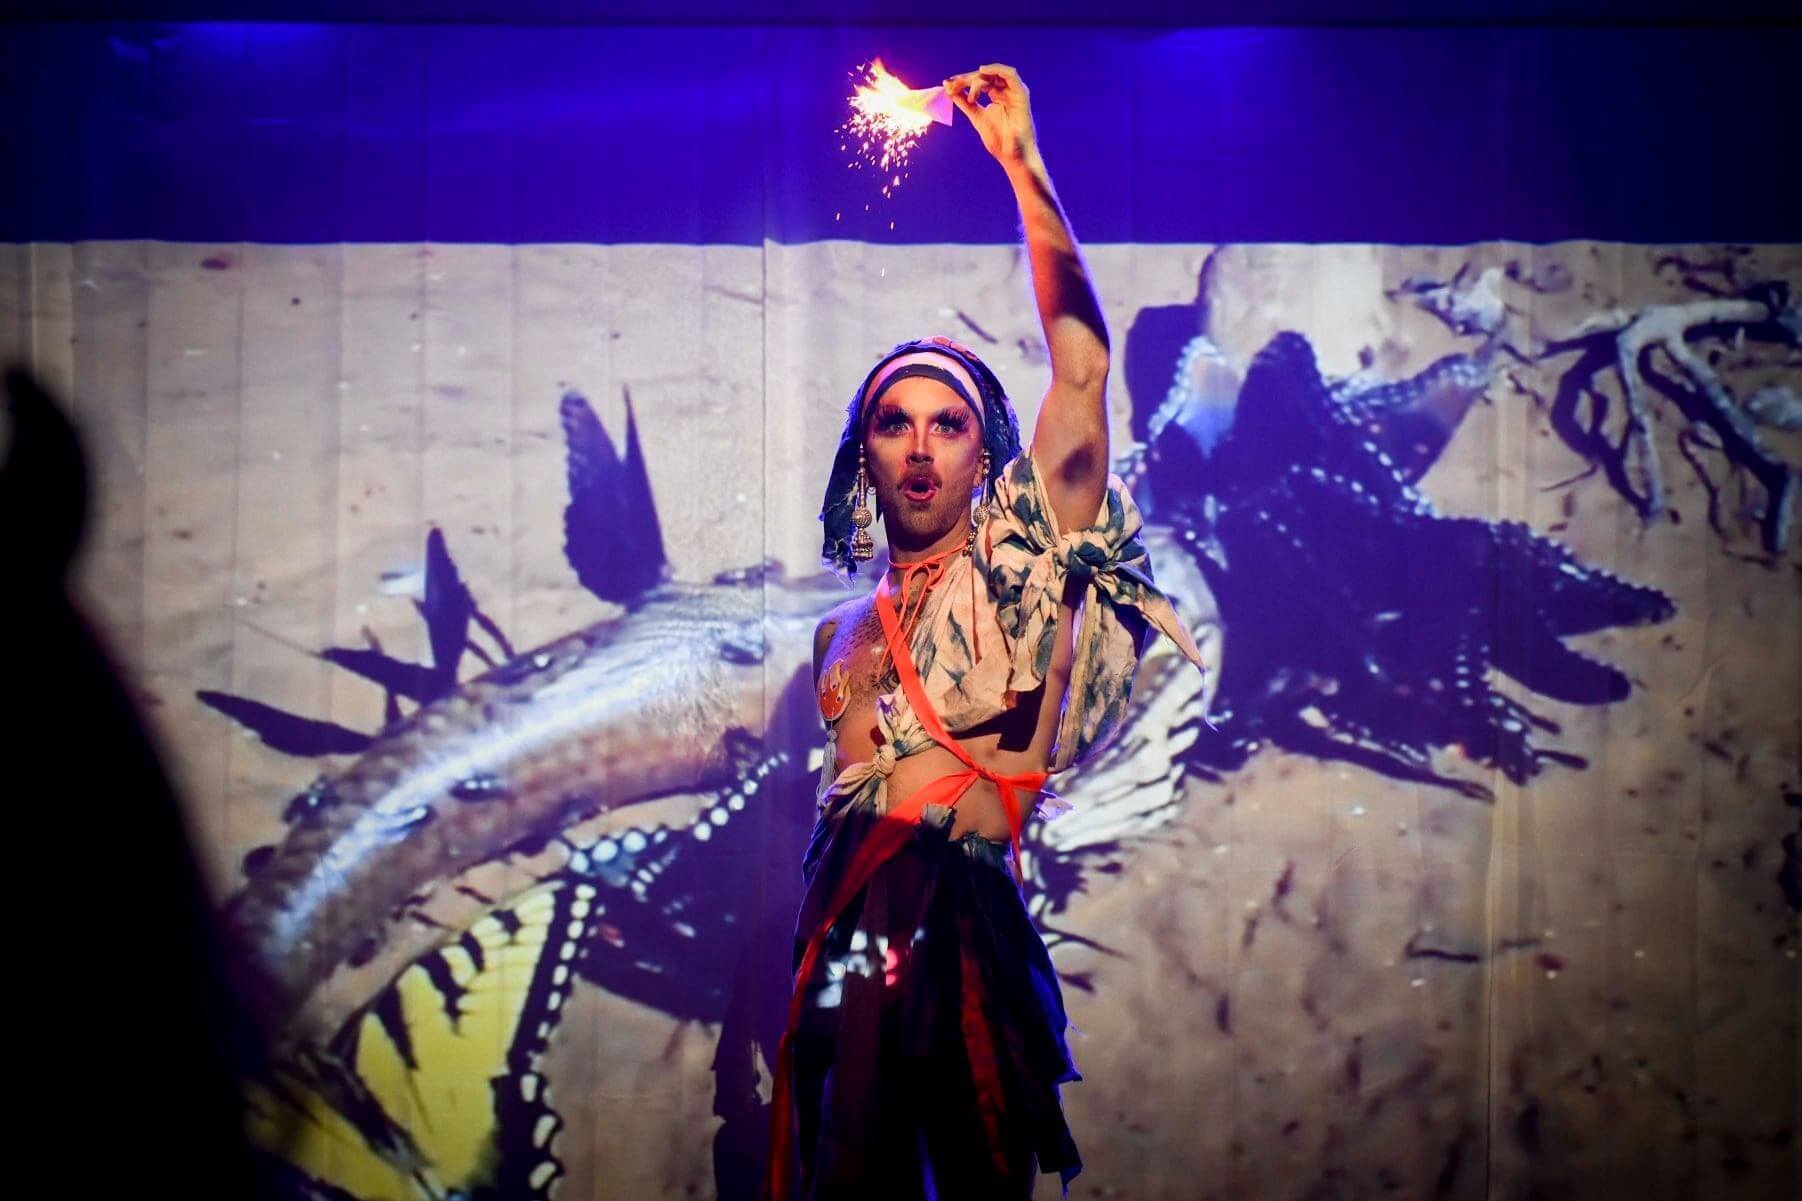 Performer on stage with colour back drop and fire